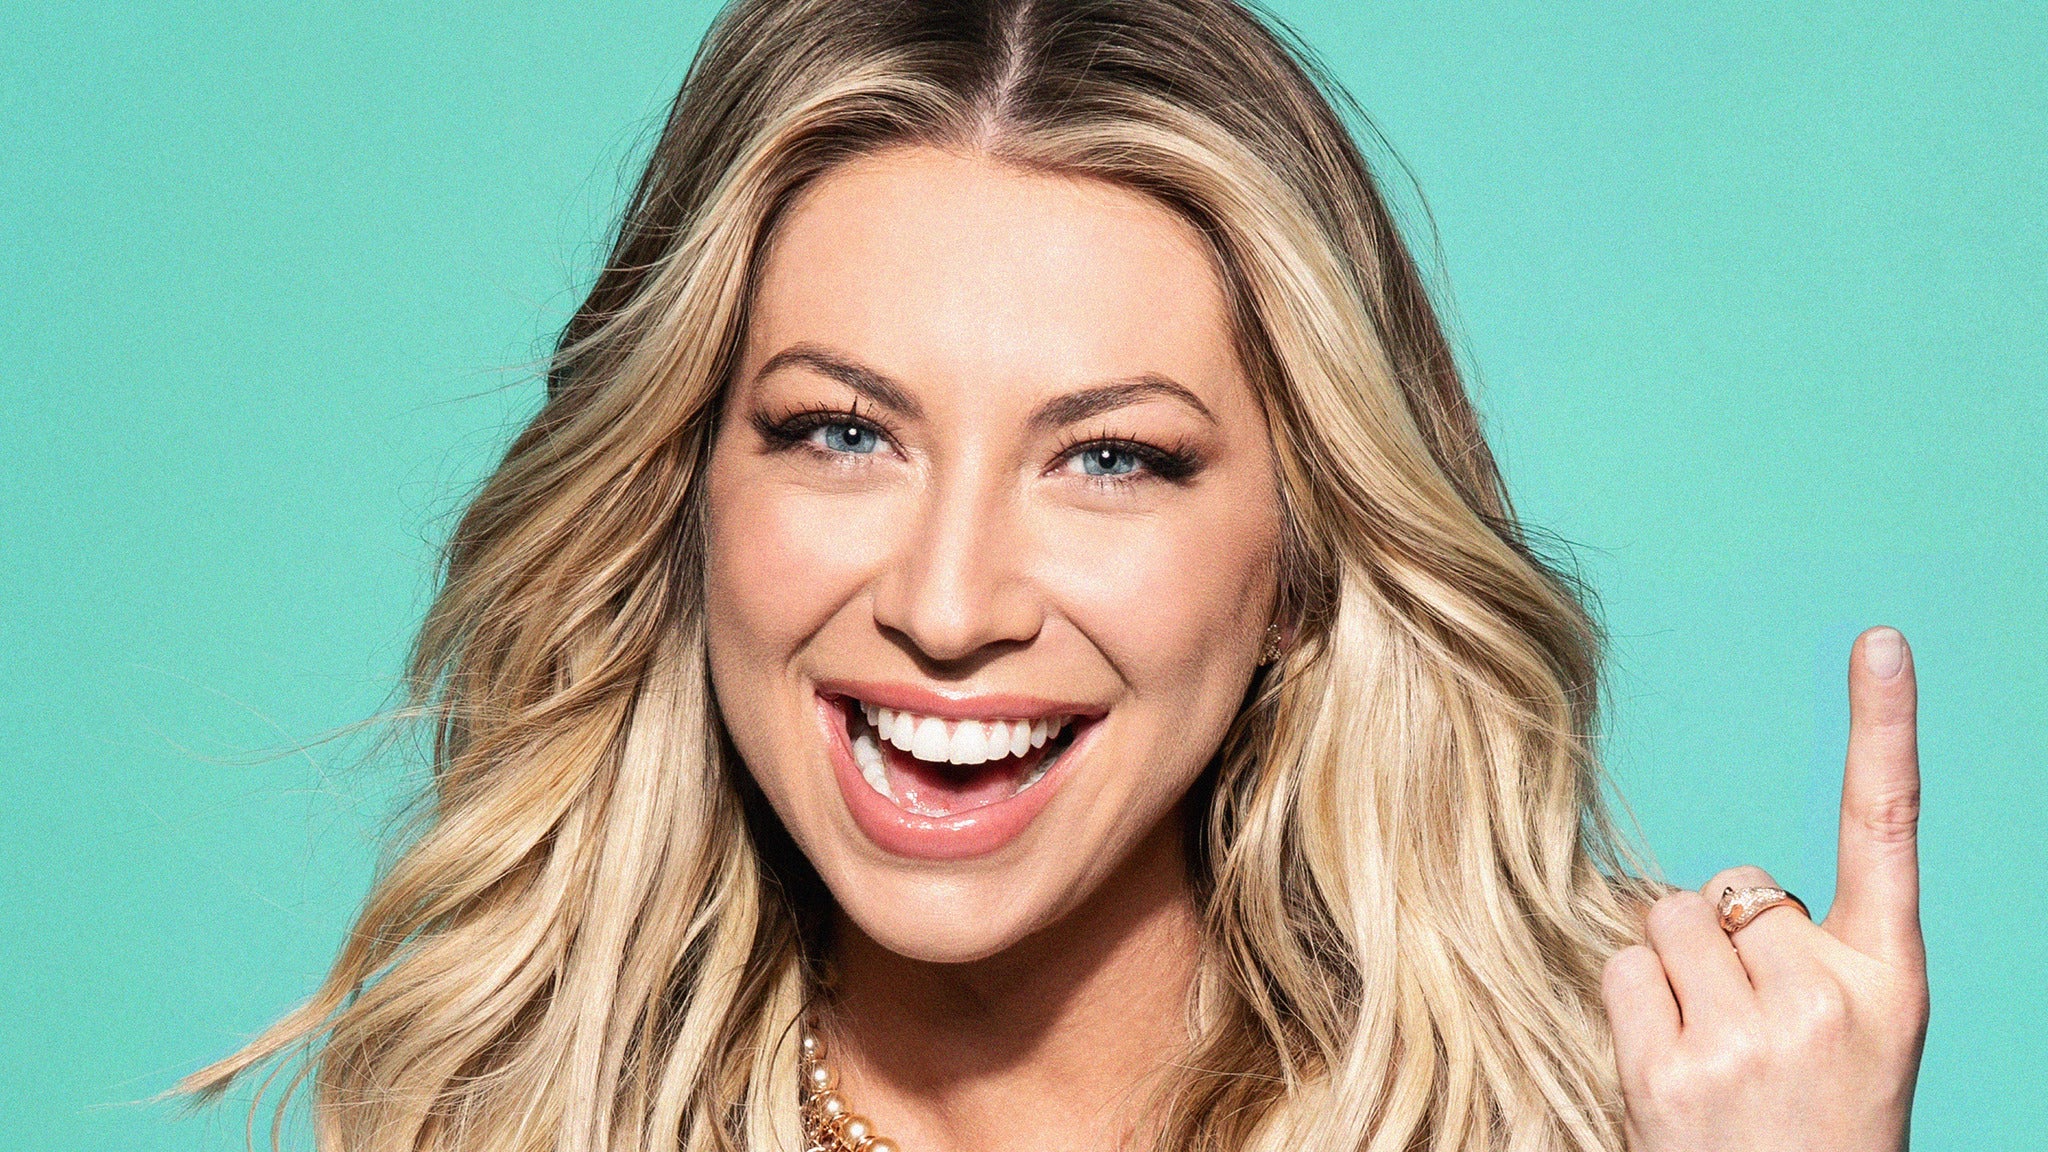 Straight Up with Stassi W/ Special Guests Beau Clark & Taylor Strecker in Denver promo photo for VIP Meet & Greet Package presale offer code